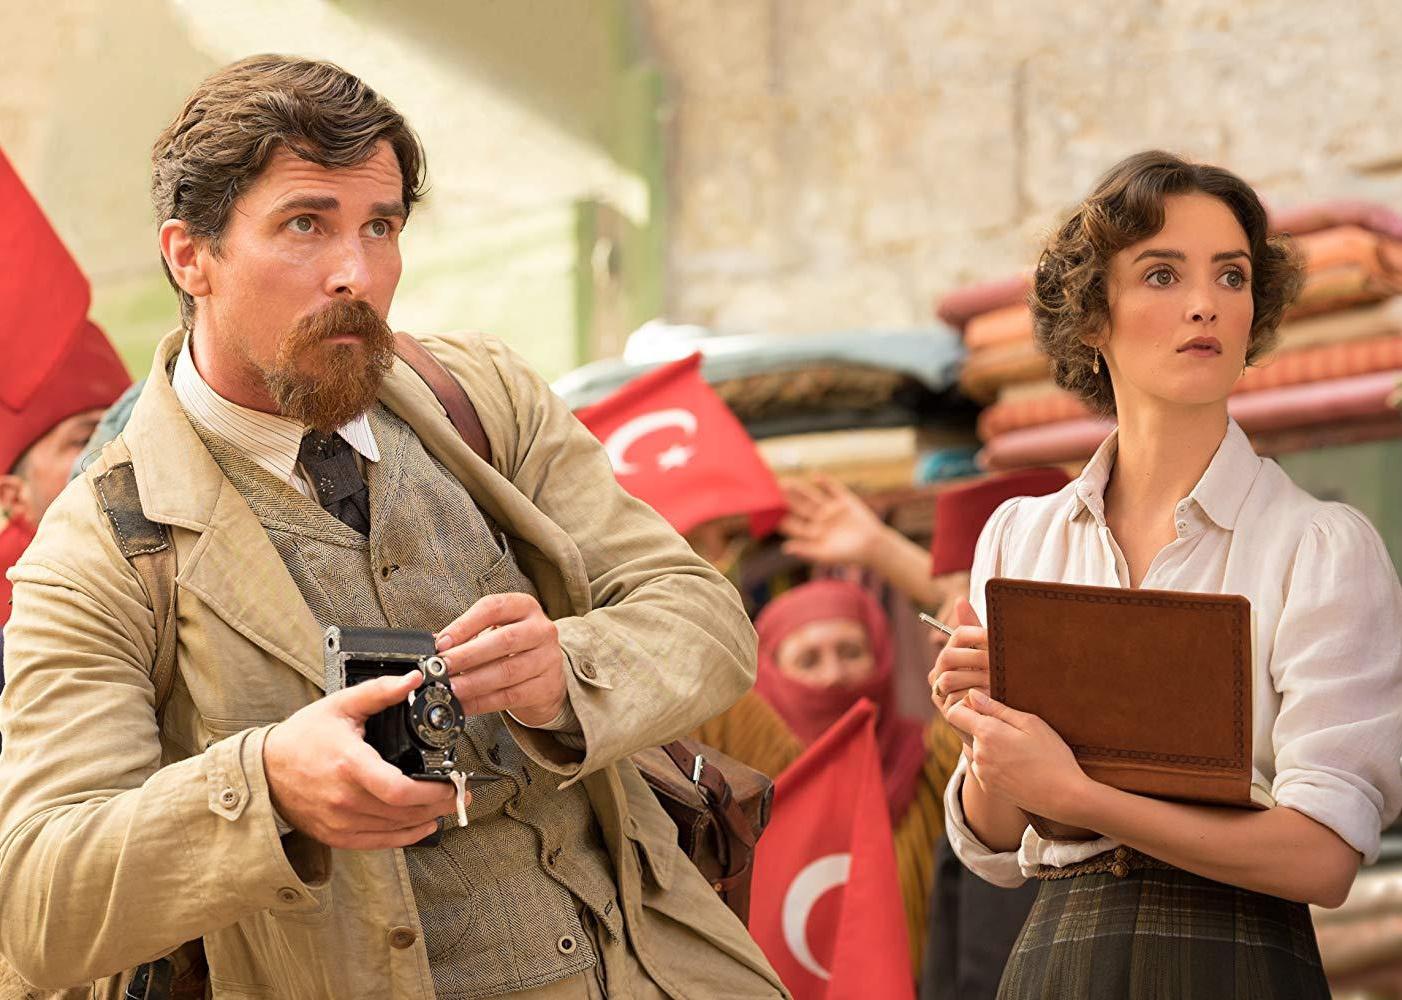 A scene from "The Promise" set in Turkey